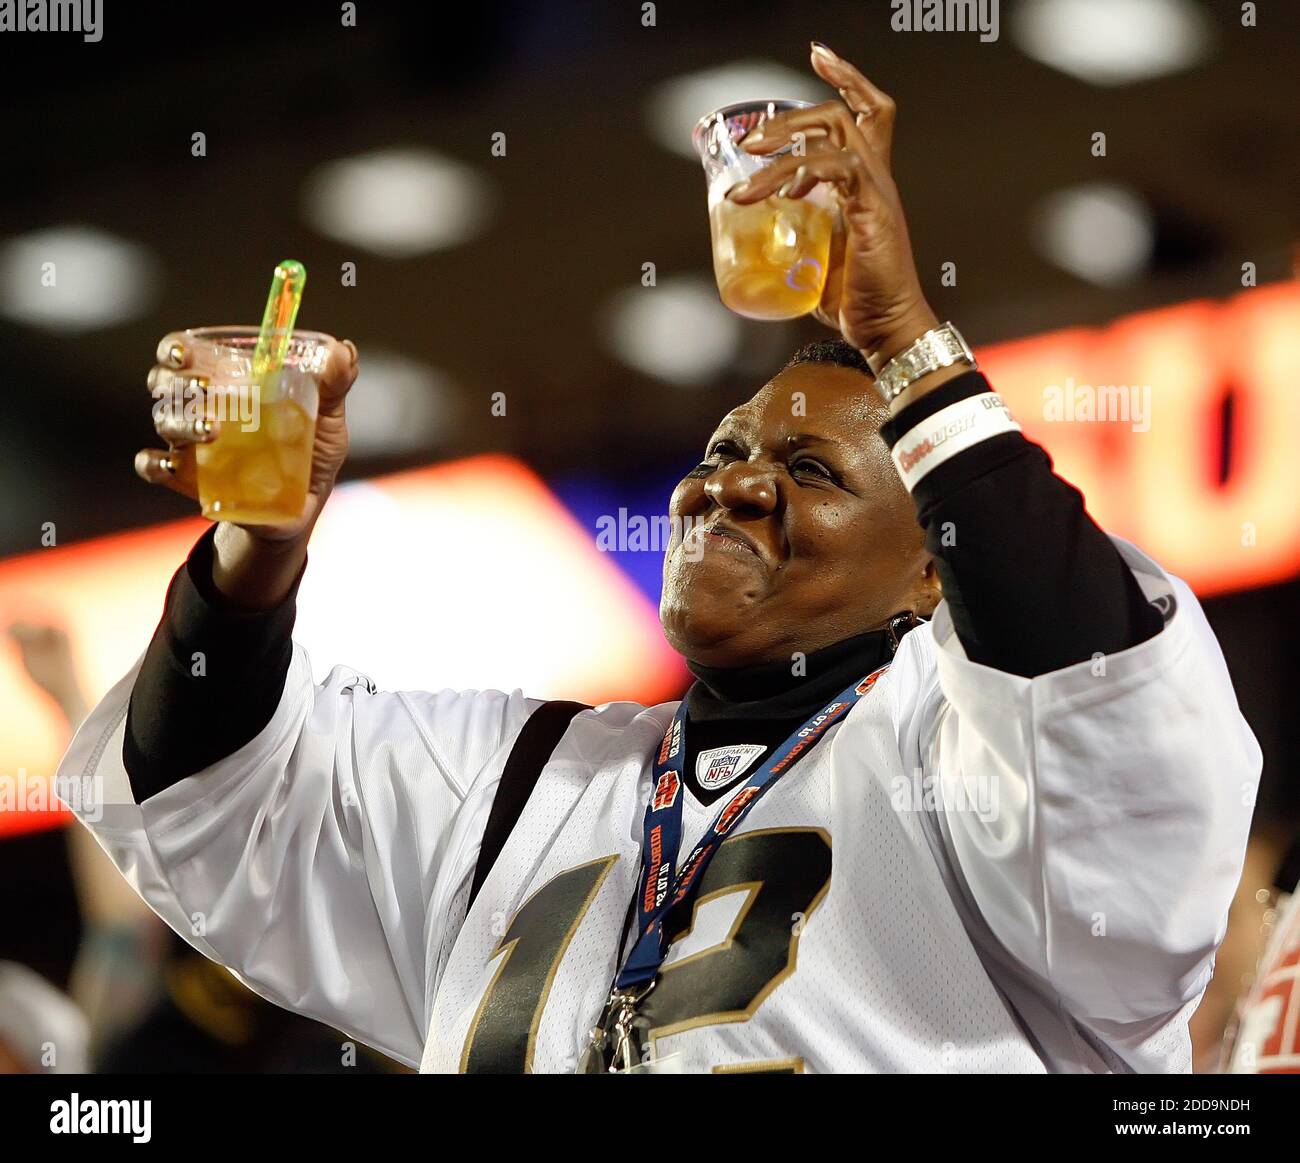 NO FILM, NO VIDEO, NO TV, NO DOCUMENTARY - A Saints fan celebrates in the end zone in Super Bowl XLIV at Sun Life Stadium in Miami Gardens, FL, USA on February 7, 2010. The New Orleans Saints beat the Indianapolis Colts 31-17 Photo by Gary Green/Orlando Sentinel/MCT/Cameleon/ABACAPRESS.COM Stock Photo